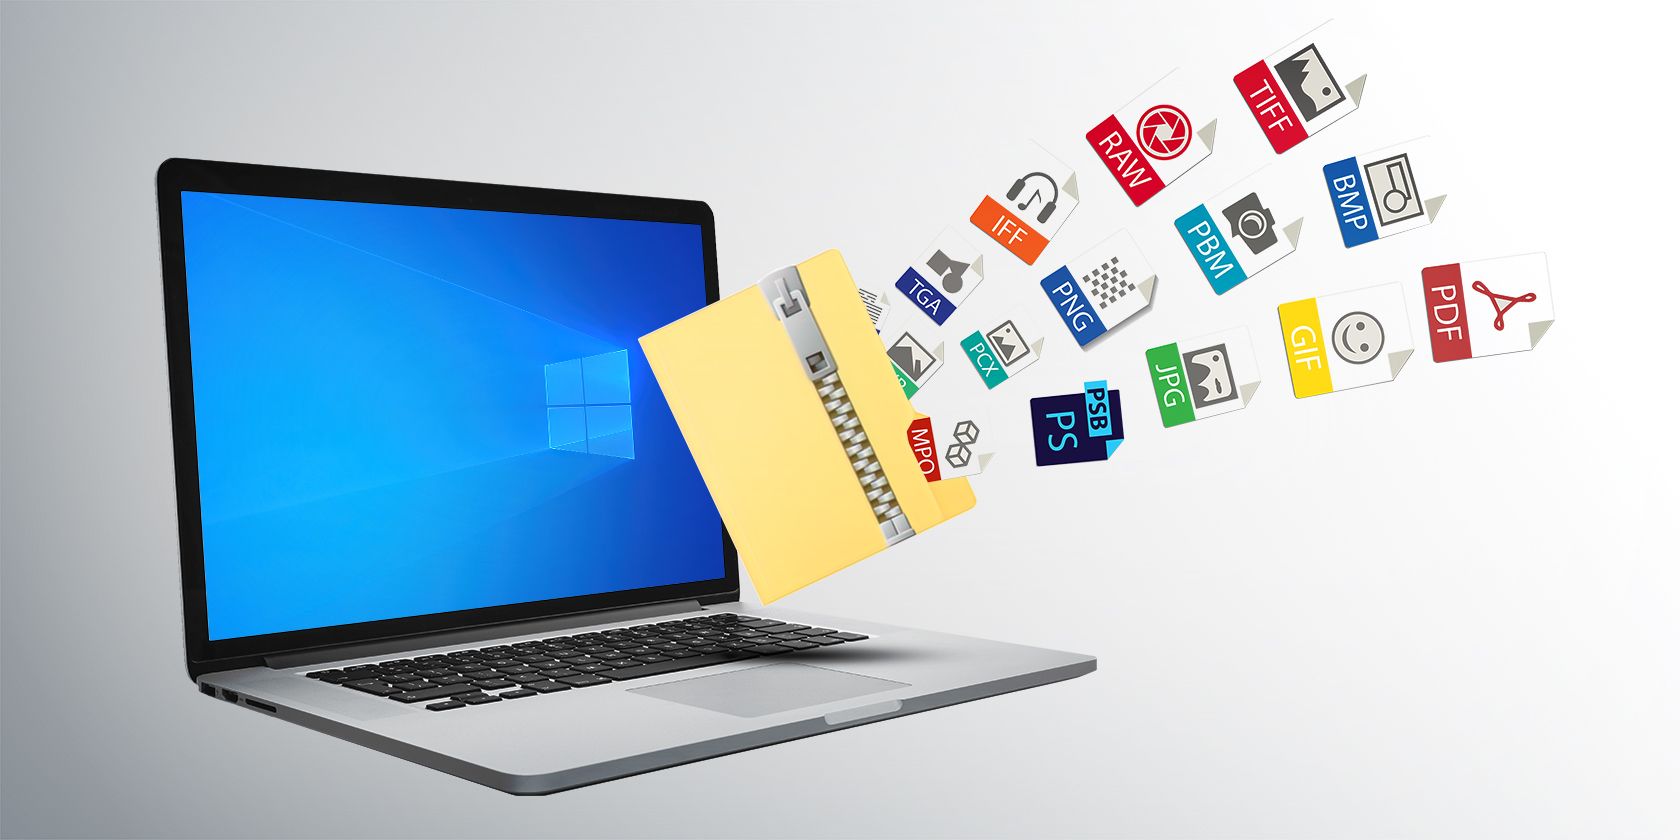 A laptop screen displays various file format icons flowing from a folder, symbolizing file transfer or organization.